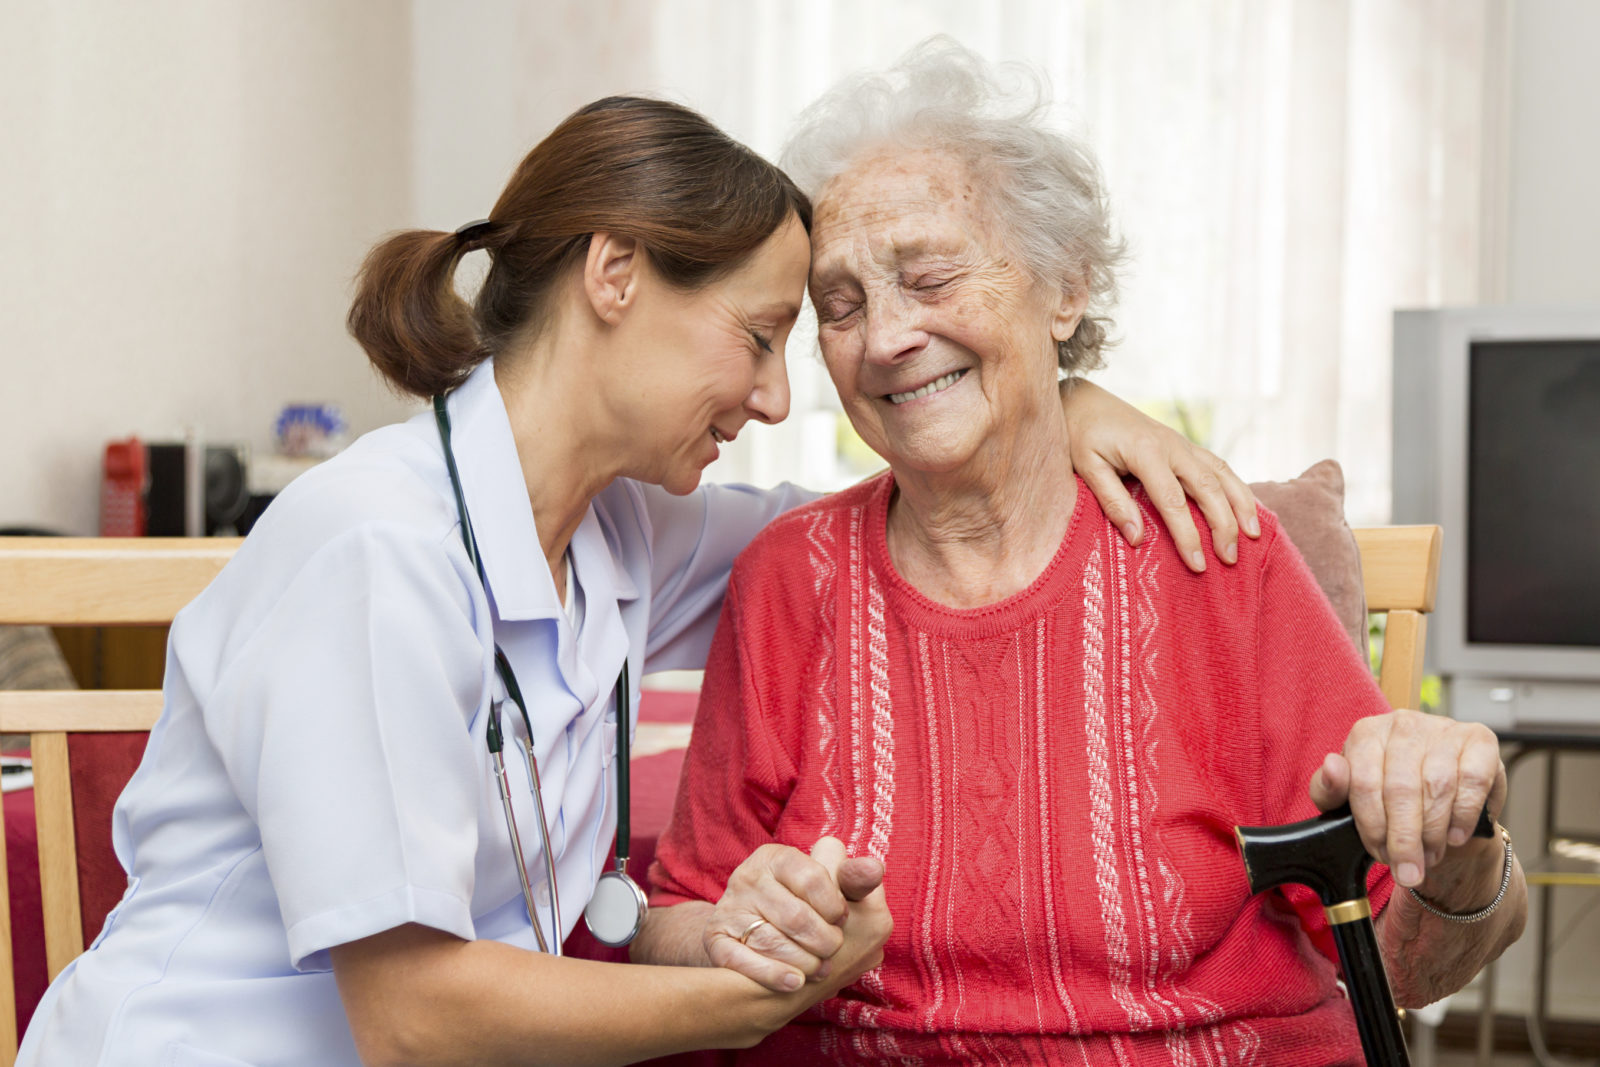 The Benefits Of Having An In Home Caregiver Blize Healthcare